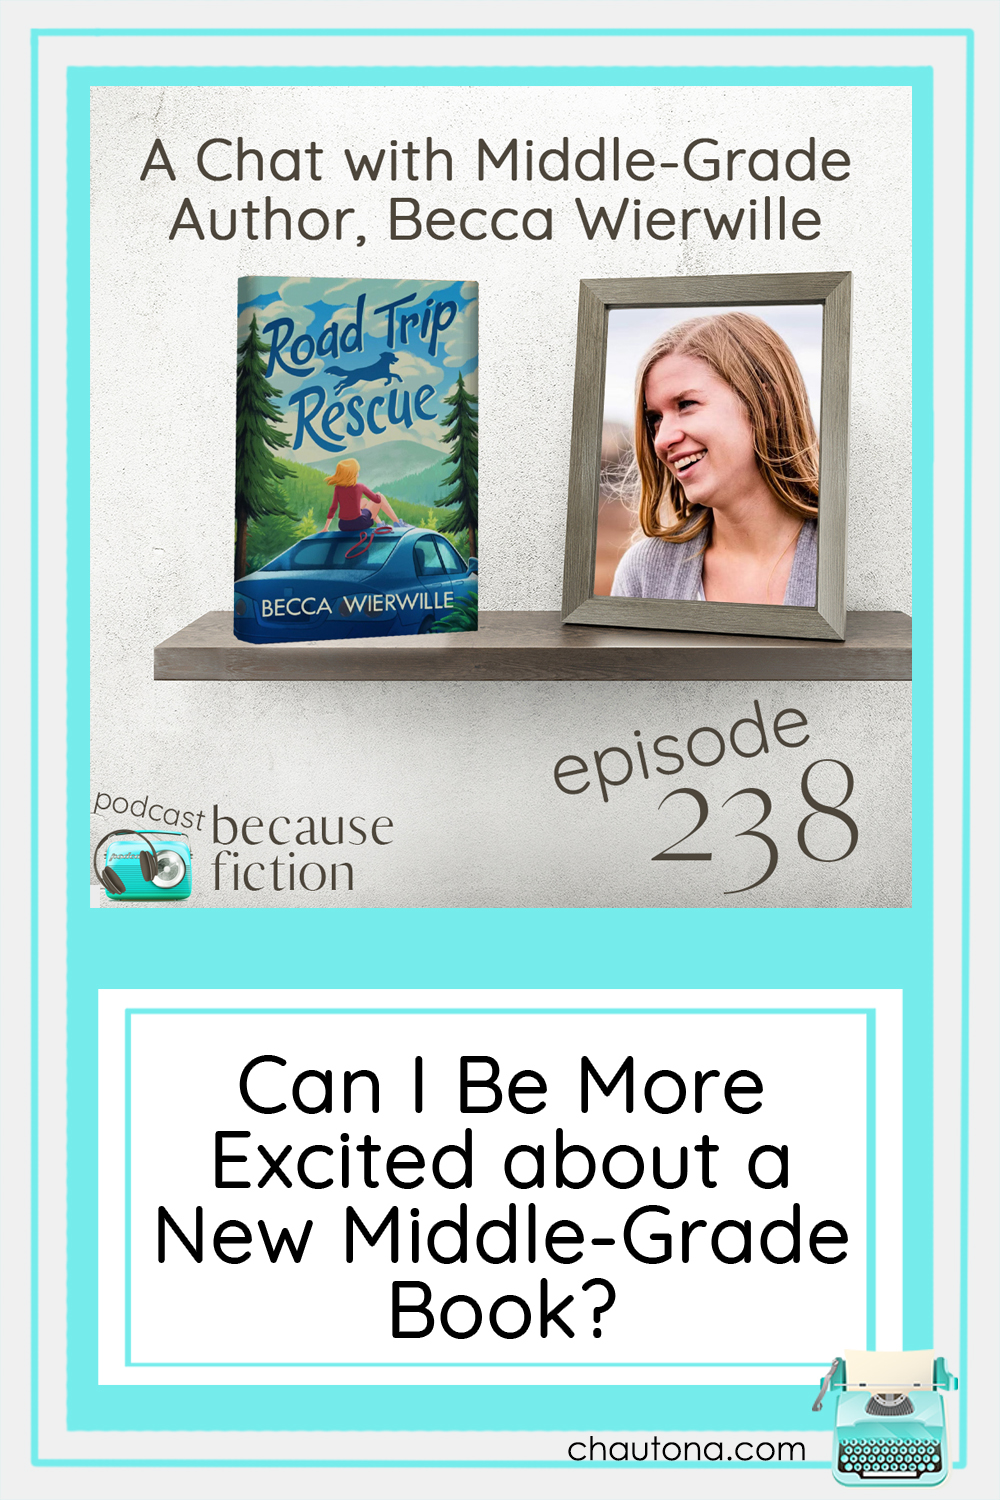 Road Trip Rescue by Becca Wierwille is a middle-grade novel coming out this fall, but you can get in on the Kickstarter today! via @chautonahavig